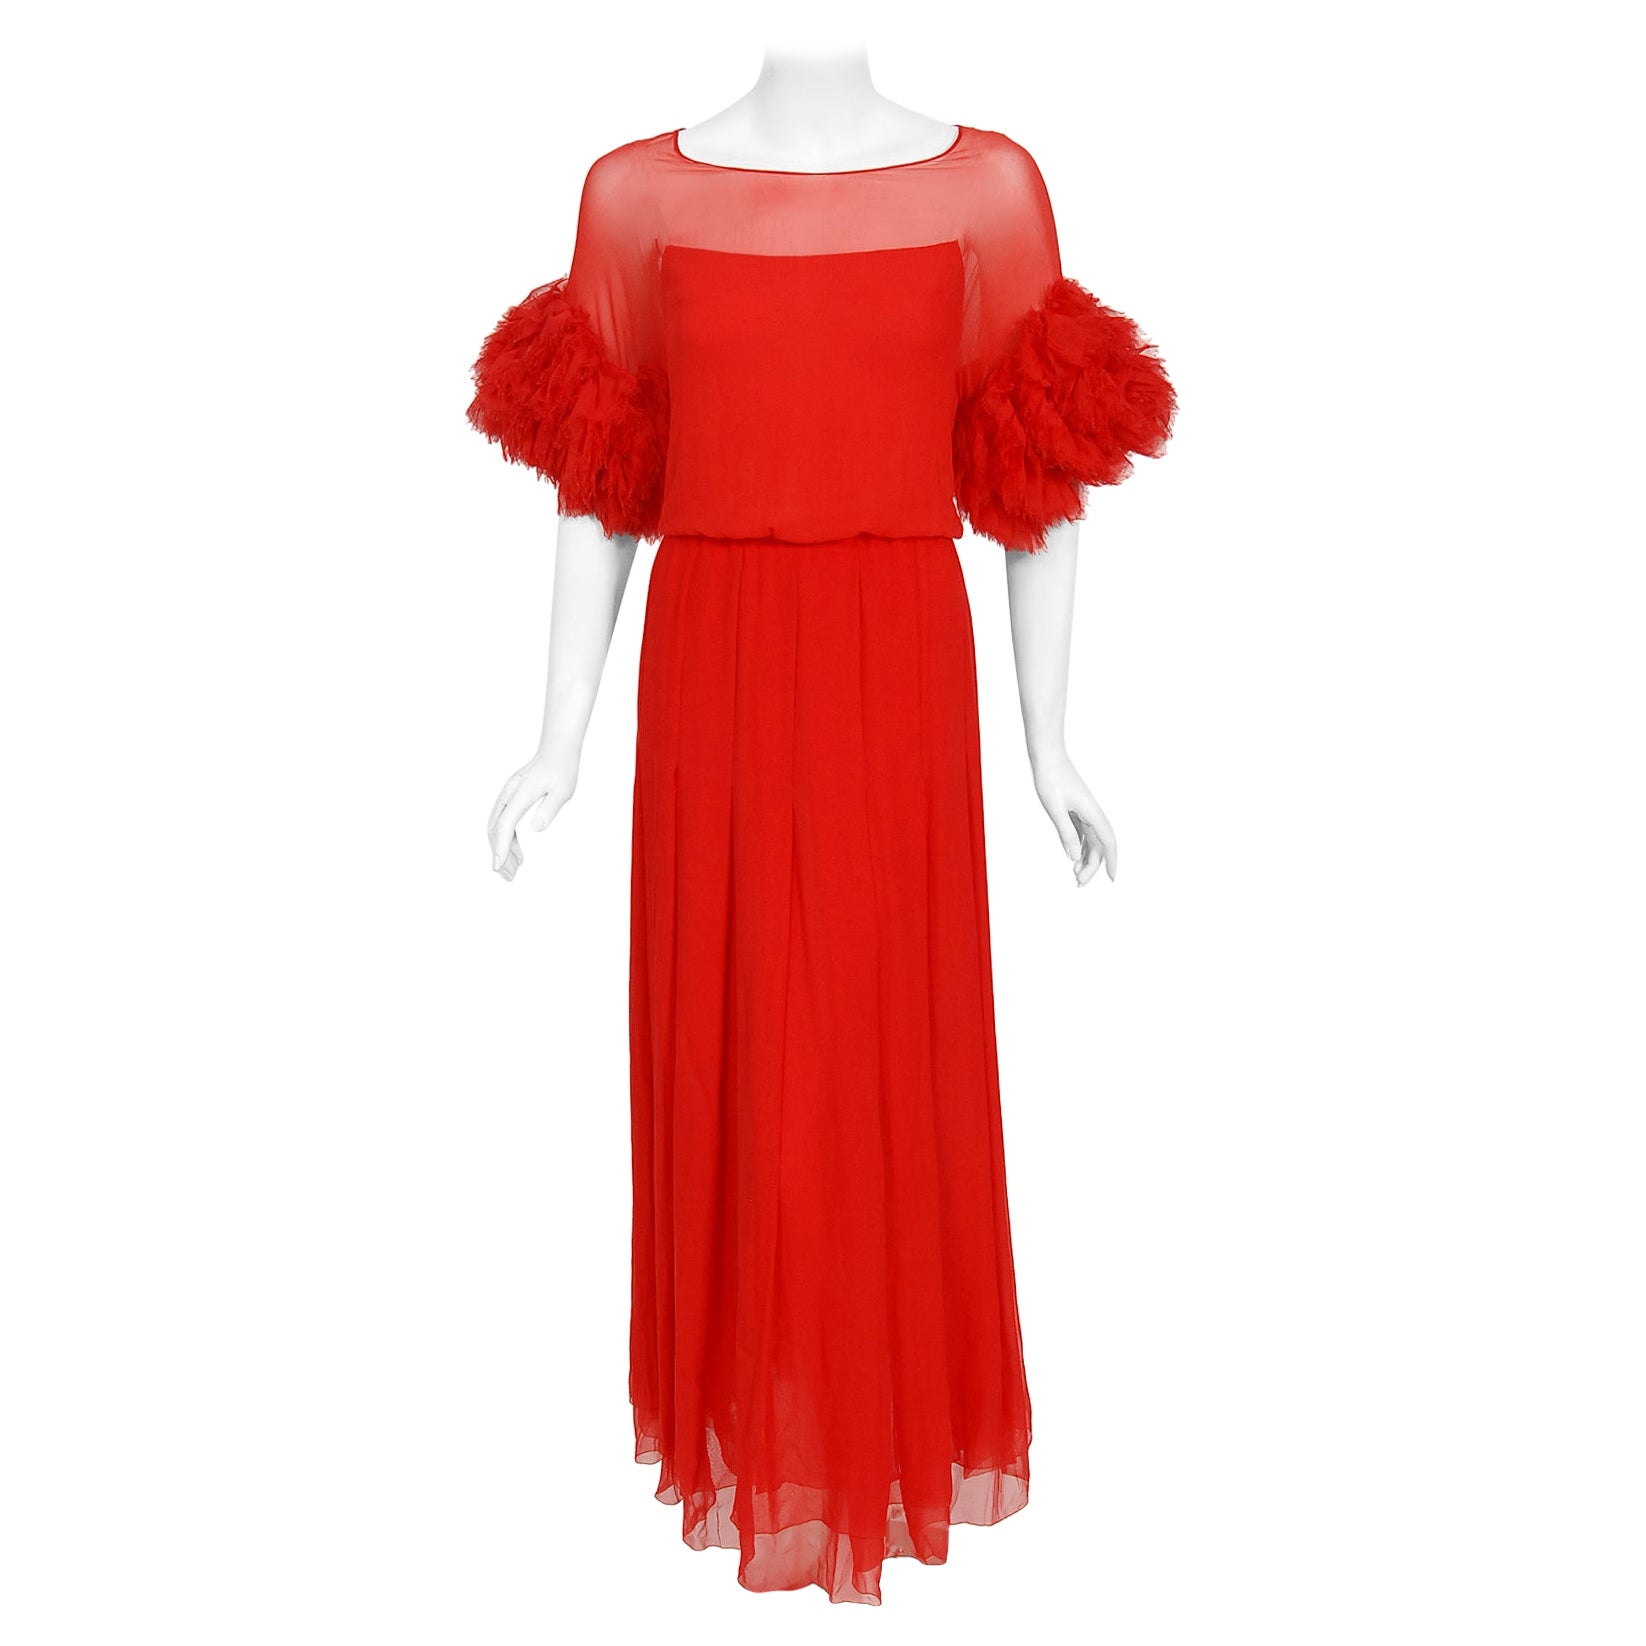 Vintage 1984 Chanel by Karl Lagerfeld Runway Red Silk Chiffon Ruffle-Sleeve Gown